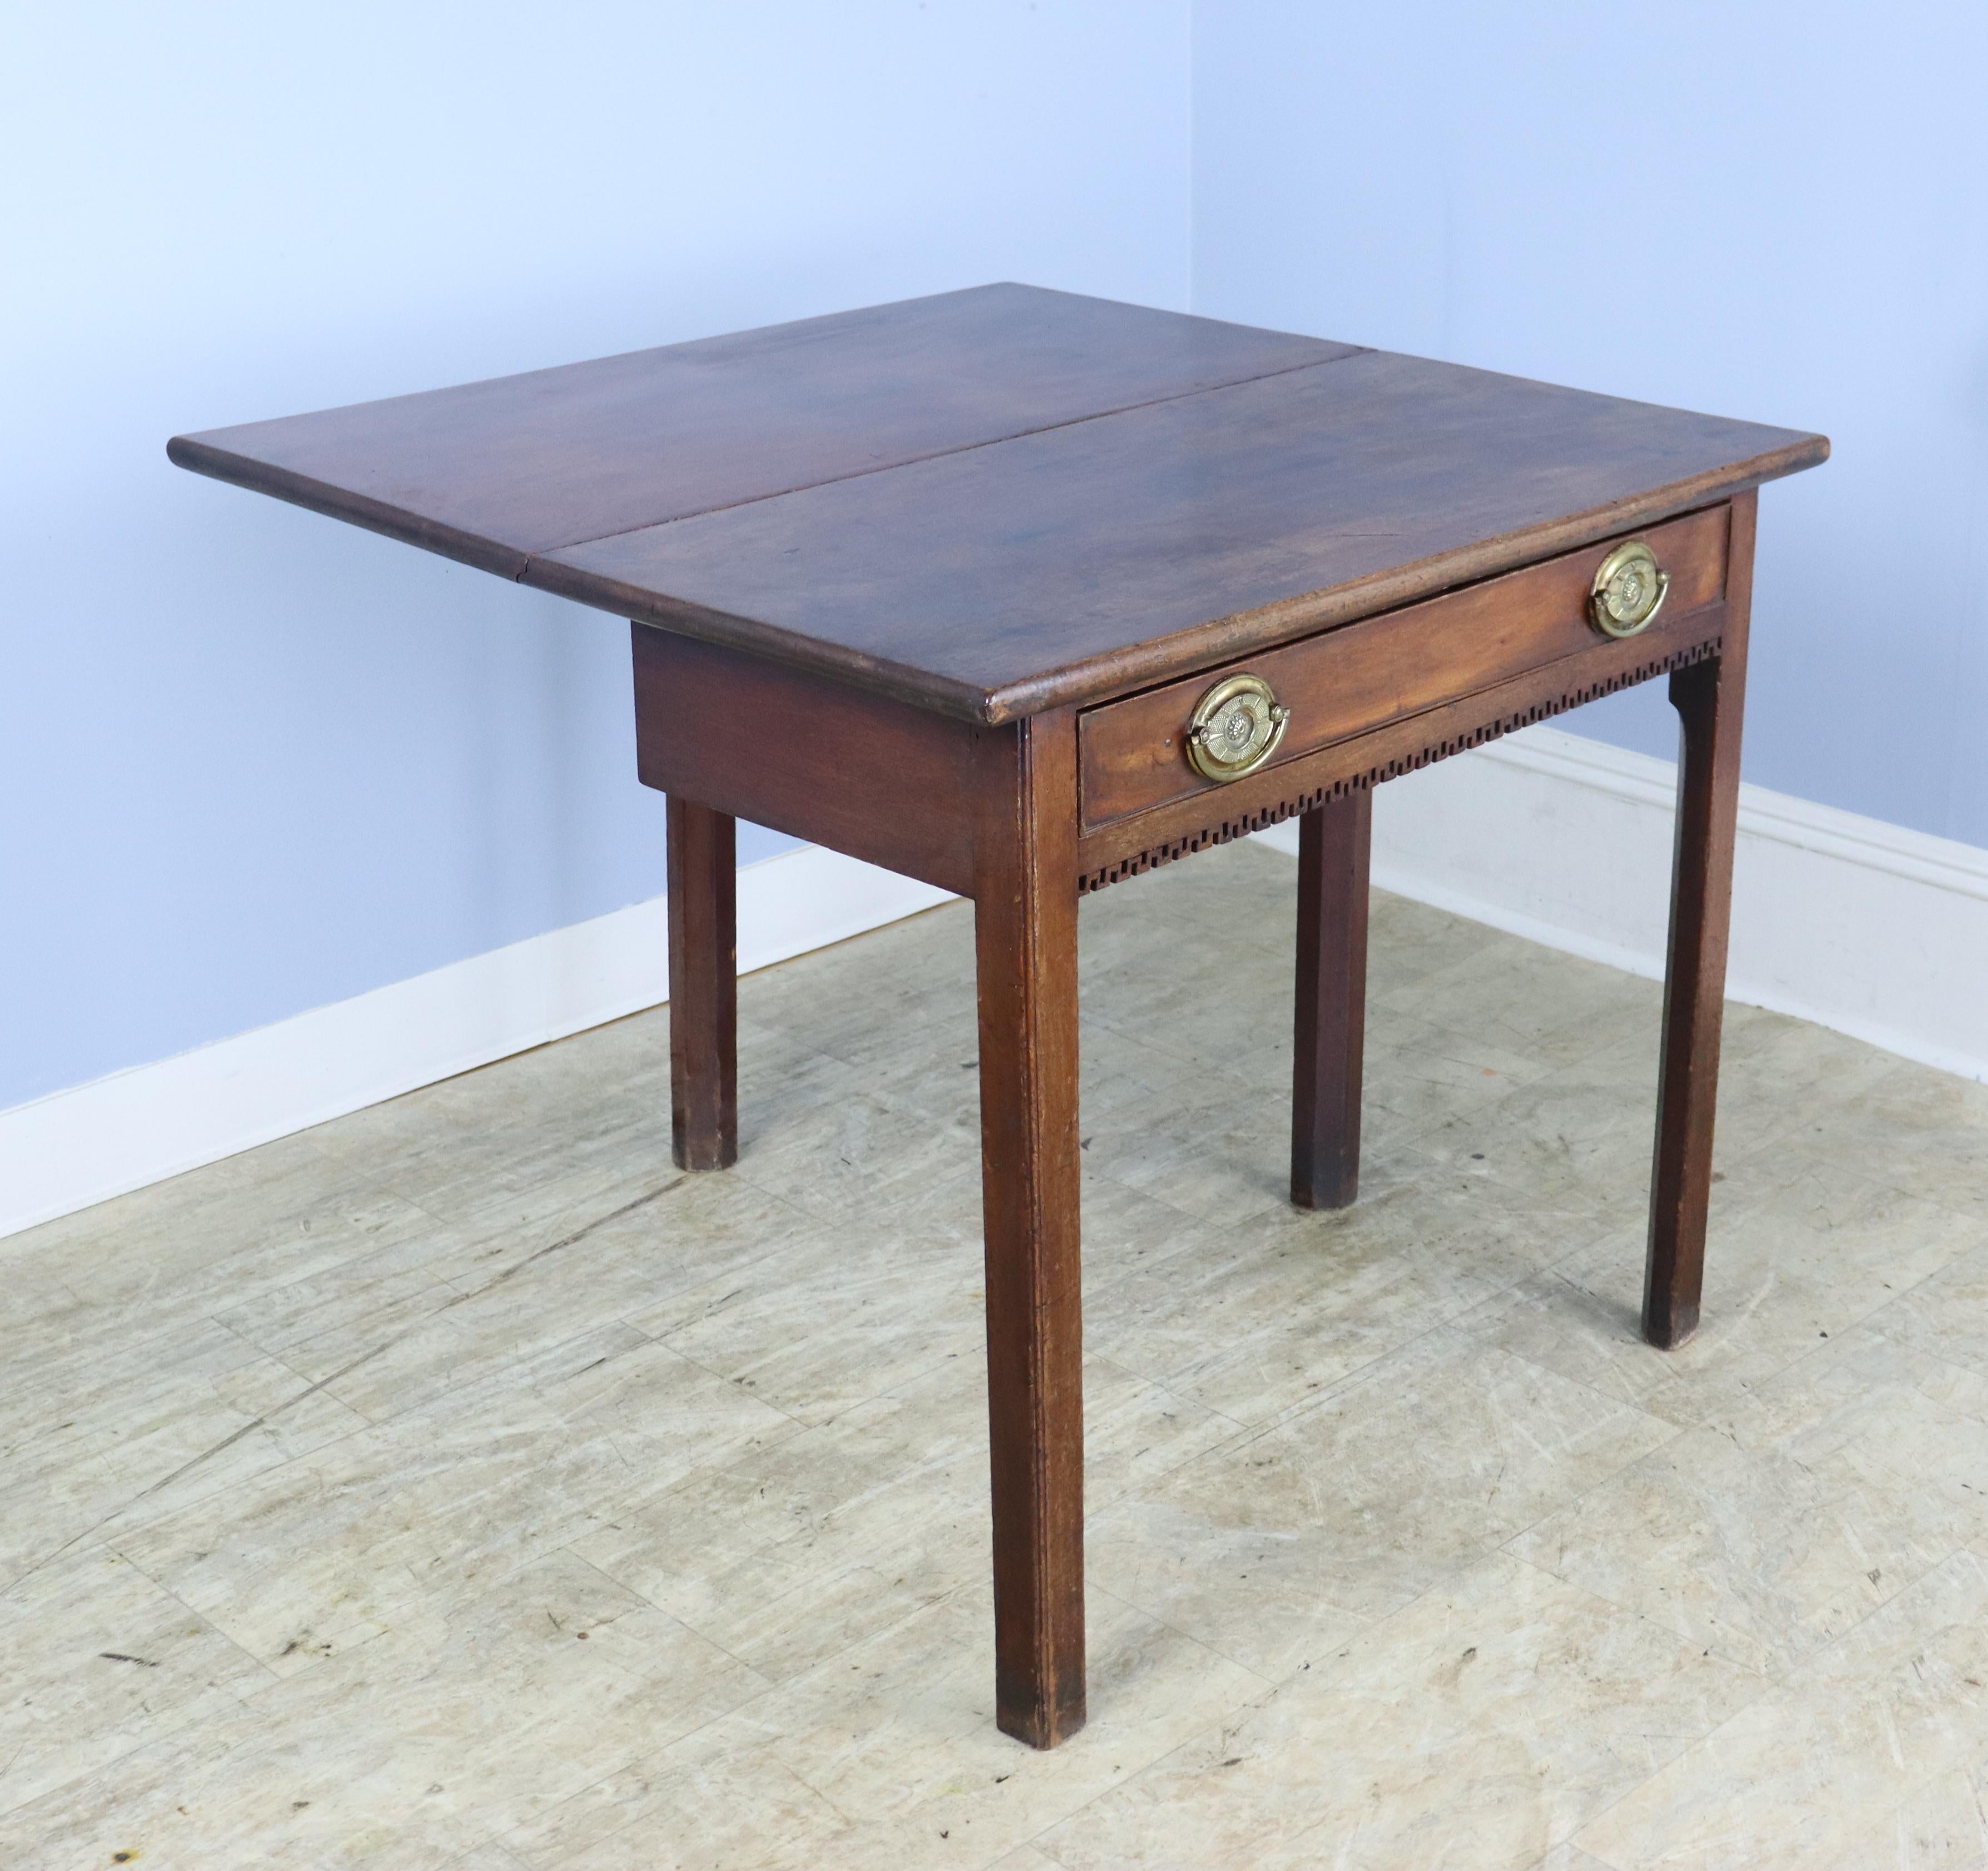 A charming Georgian mahogany card or tea table in mellow mahogany. The piece folds out to double its usable surface, and can be stored in the closed position as an attractive side table. The hand cut dentil molding at the base of the drawer is the